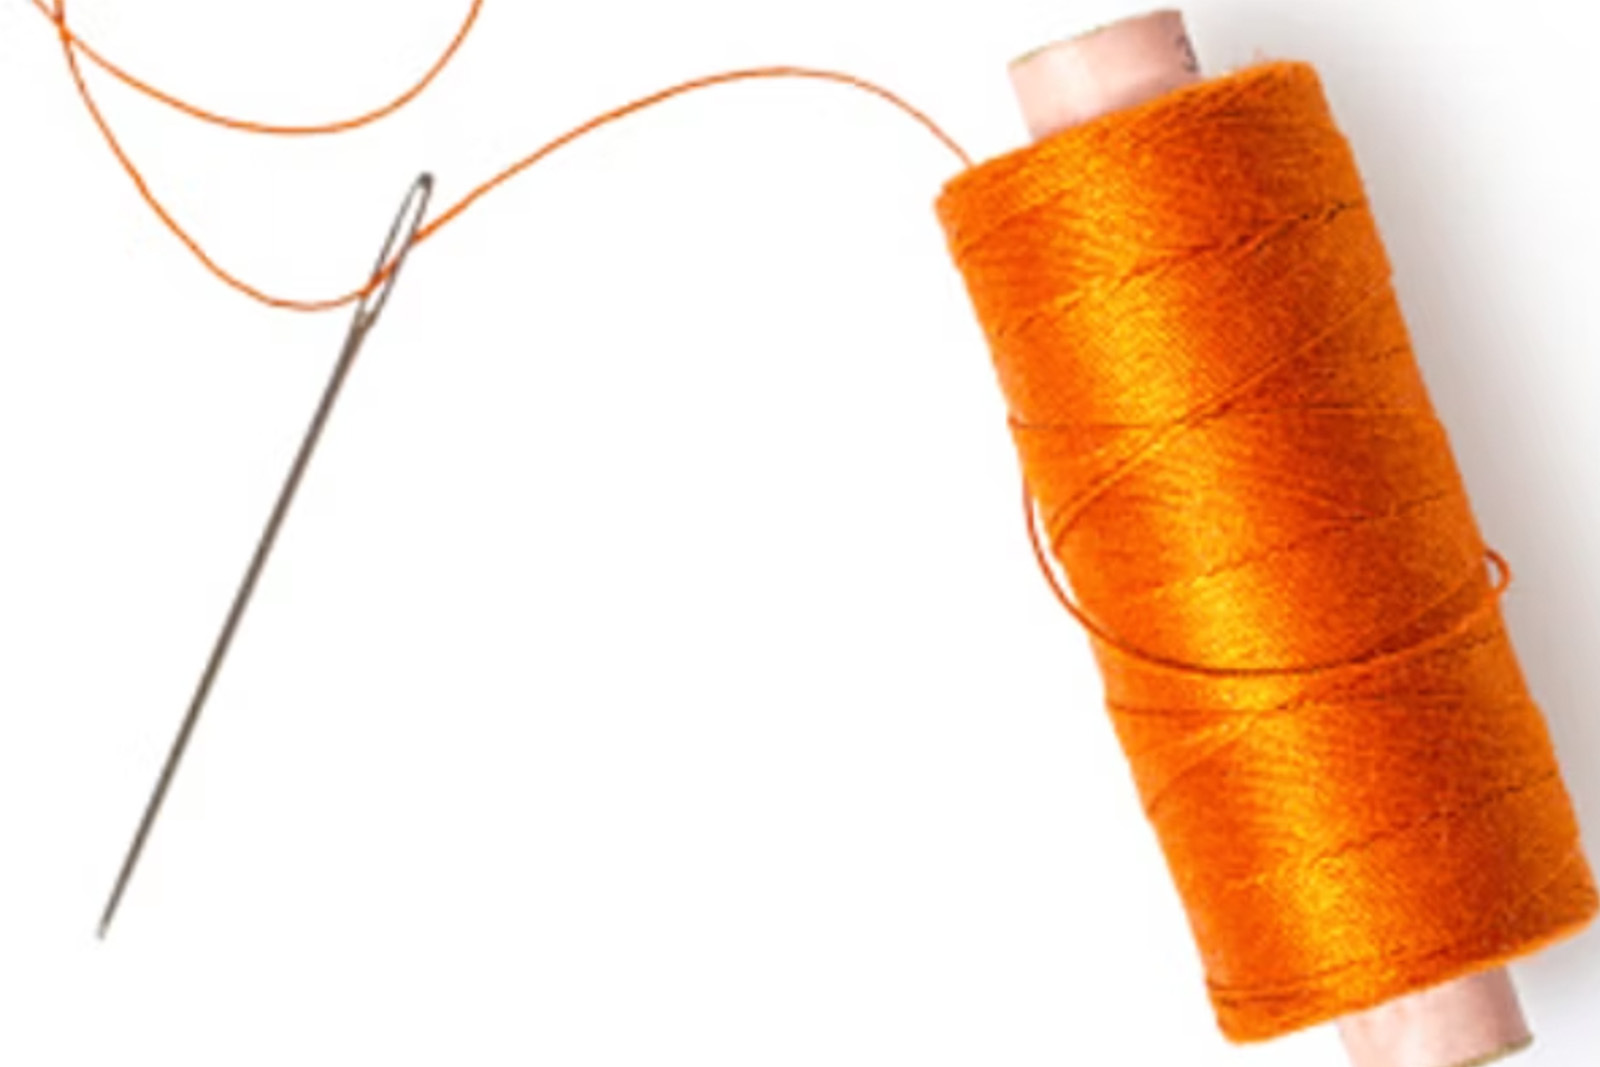 An Orange Spool of Thread With A Sewing Needle On White Background